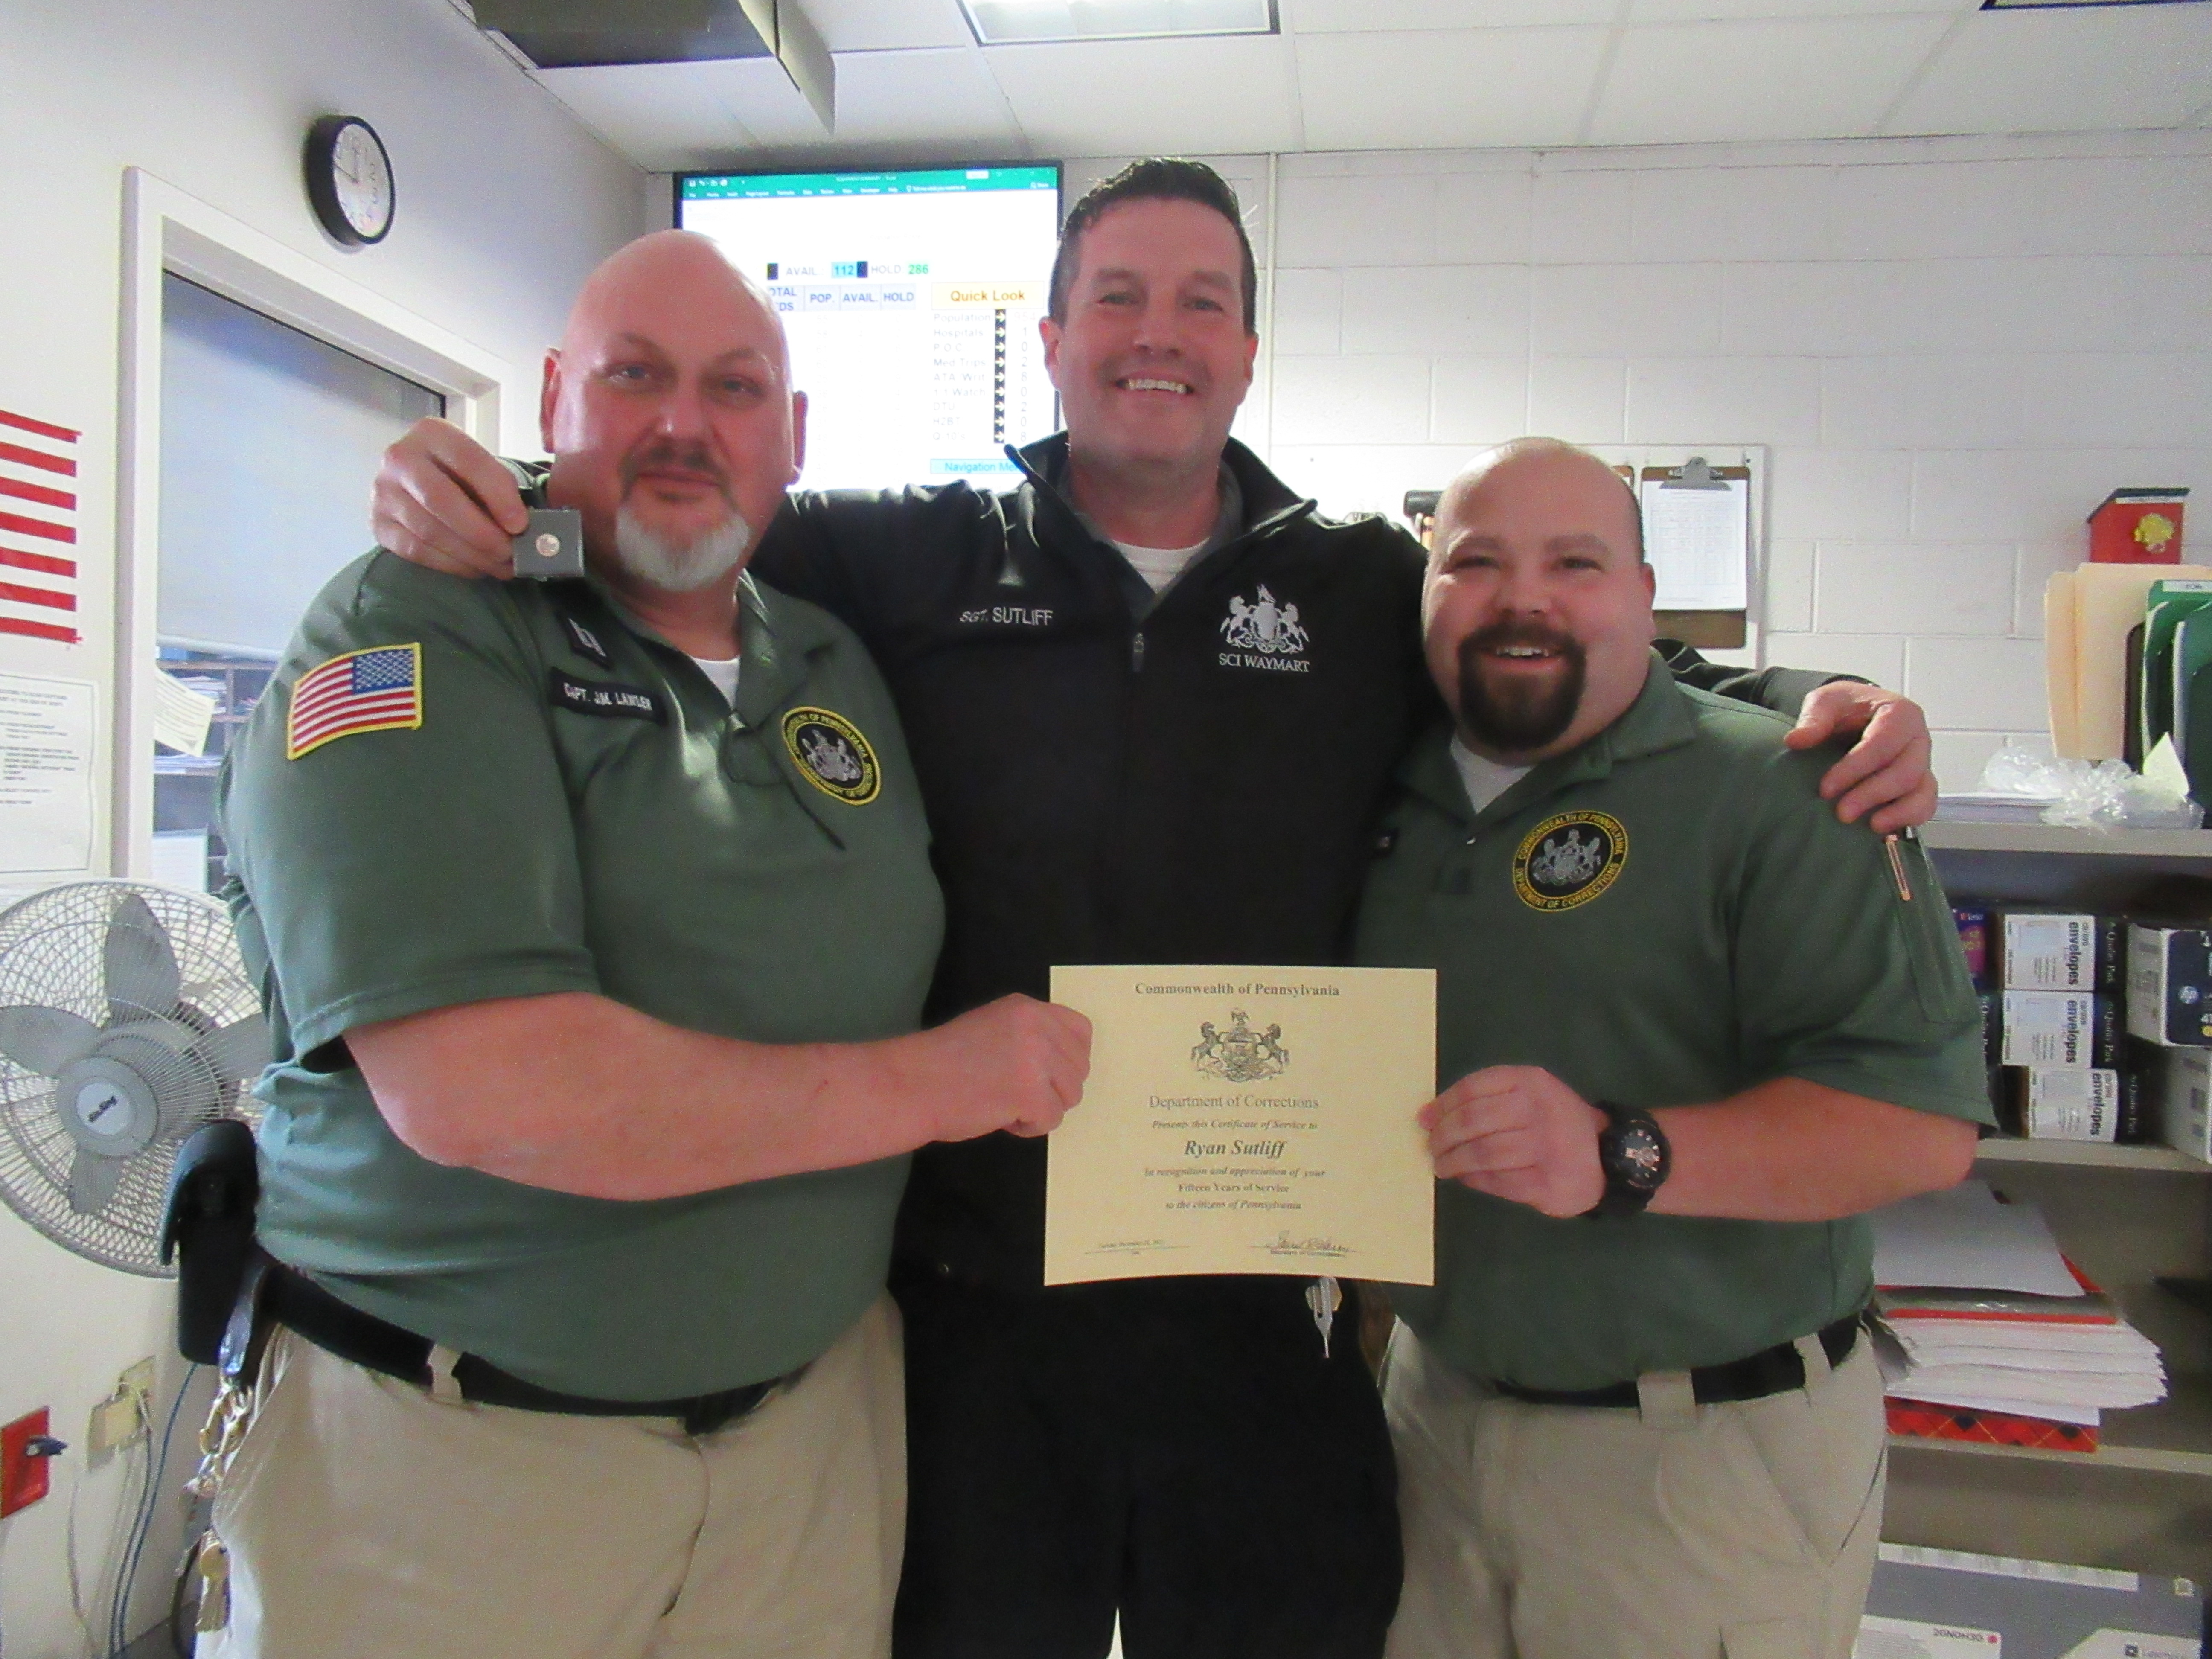 Sgt. Ryan Sutliff holding a pin while surrounded by Captain J. Lawler and Lt. C. Edwards, who are holding a certificate.